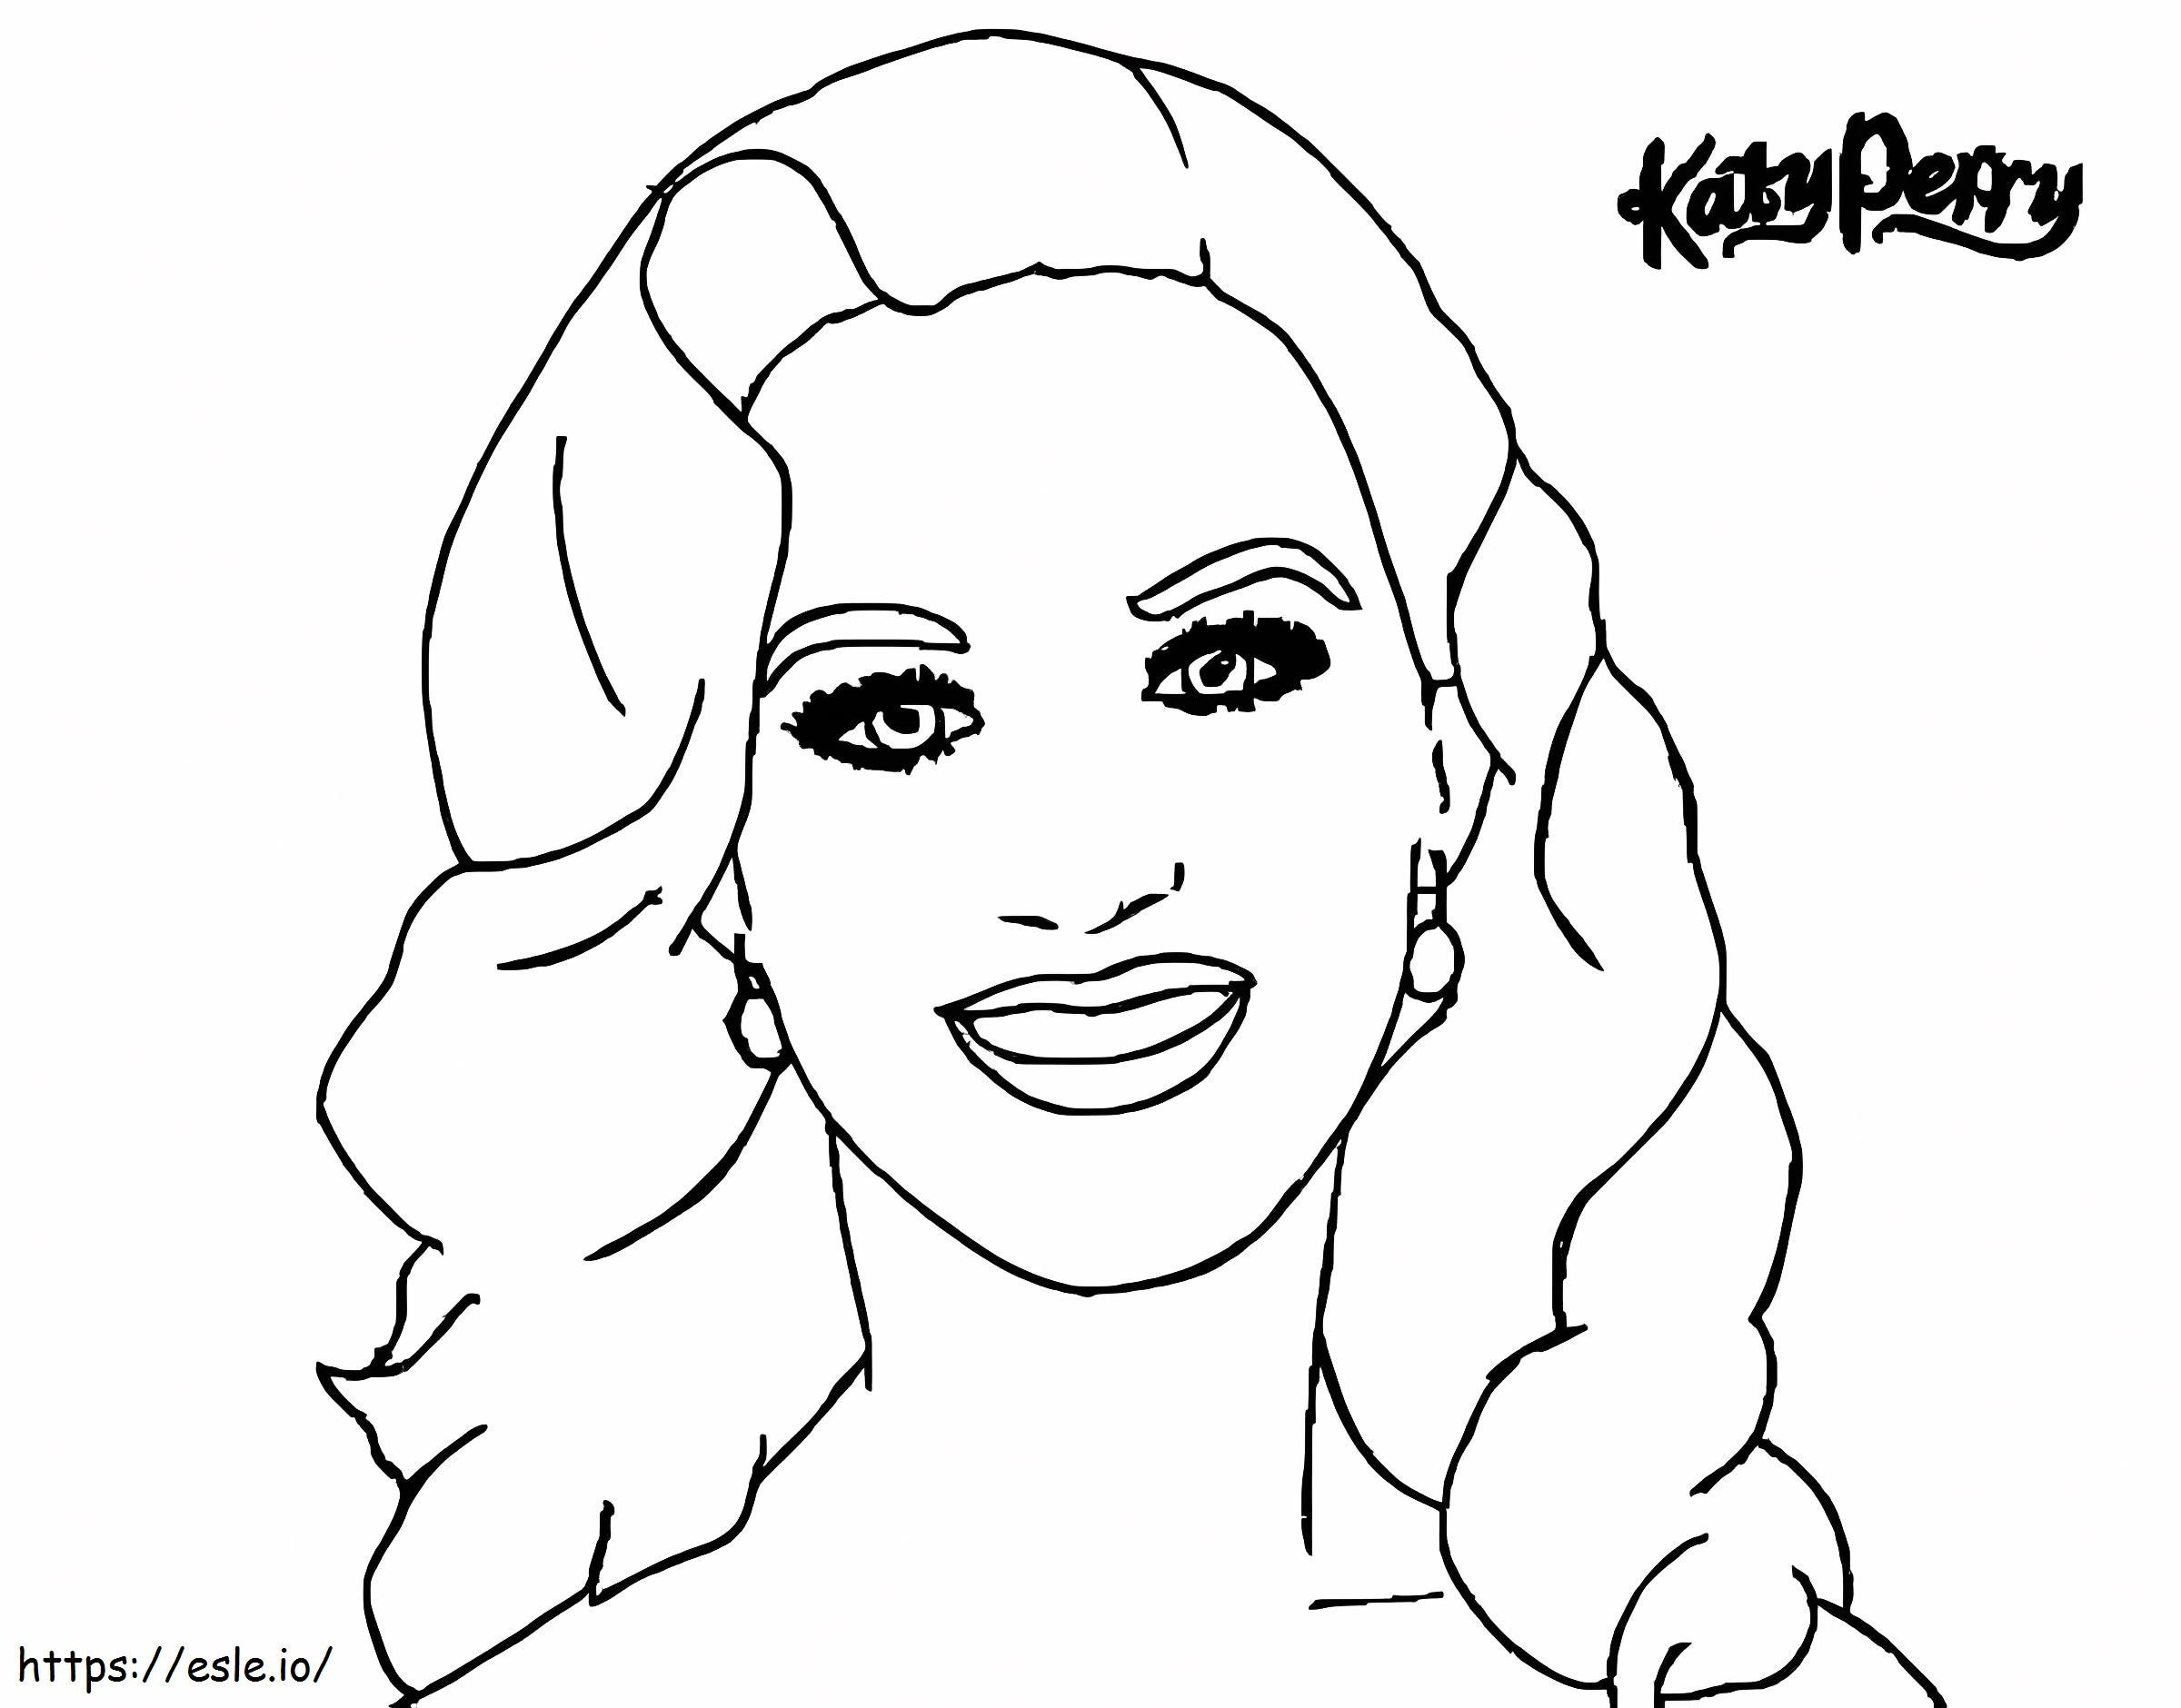 Famous Katy Perry coloring page